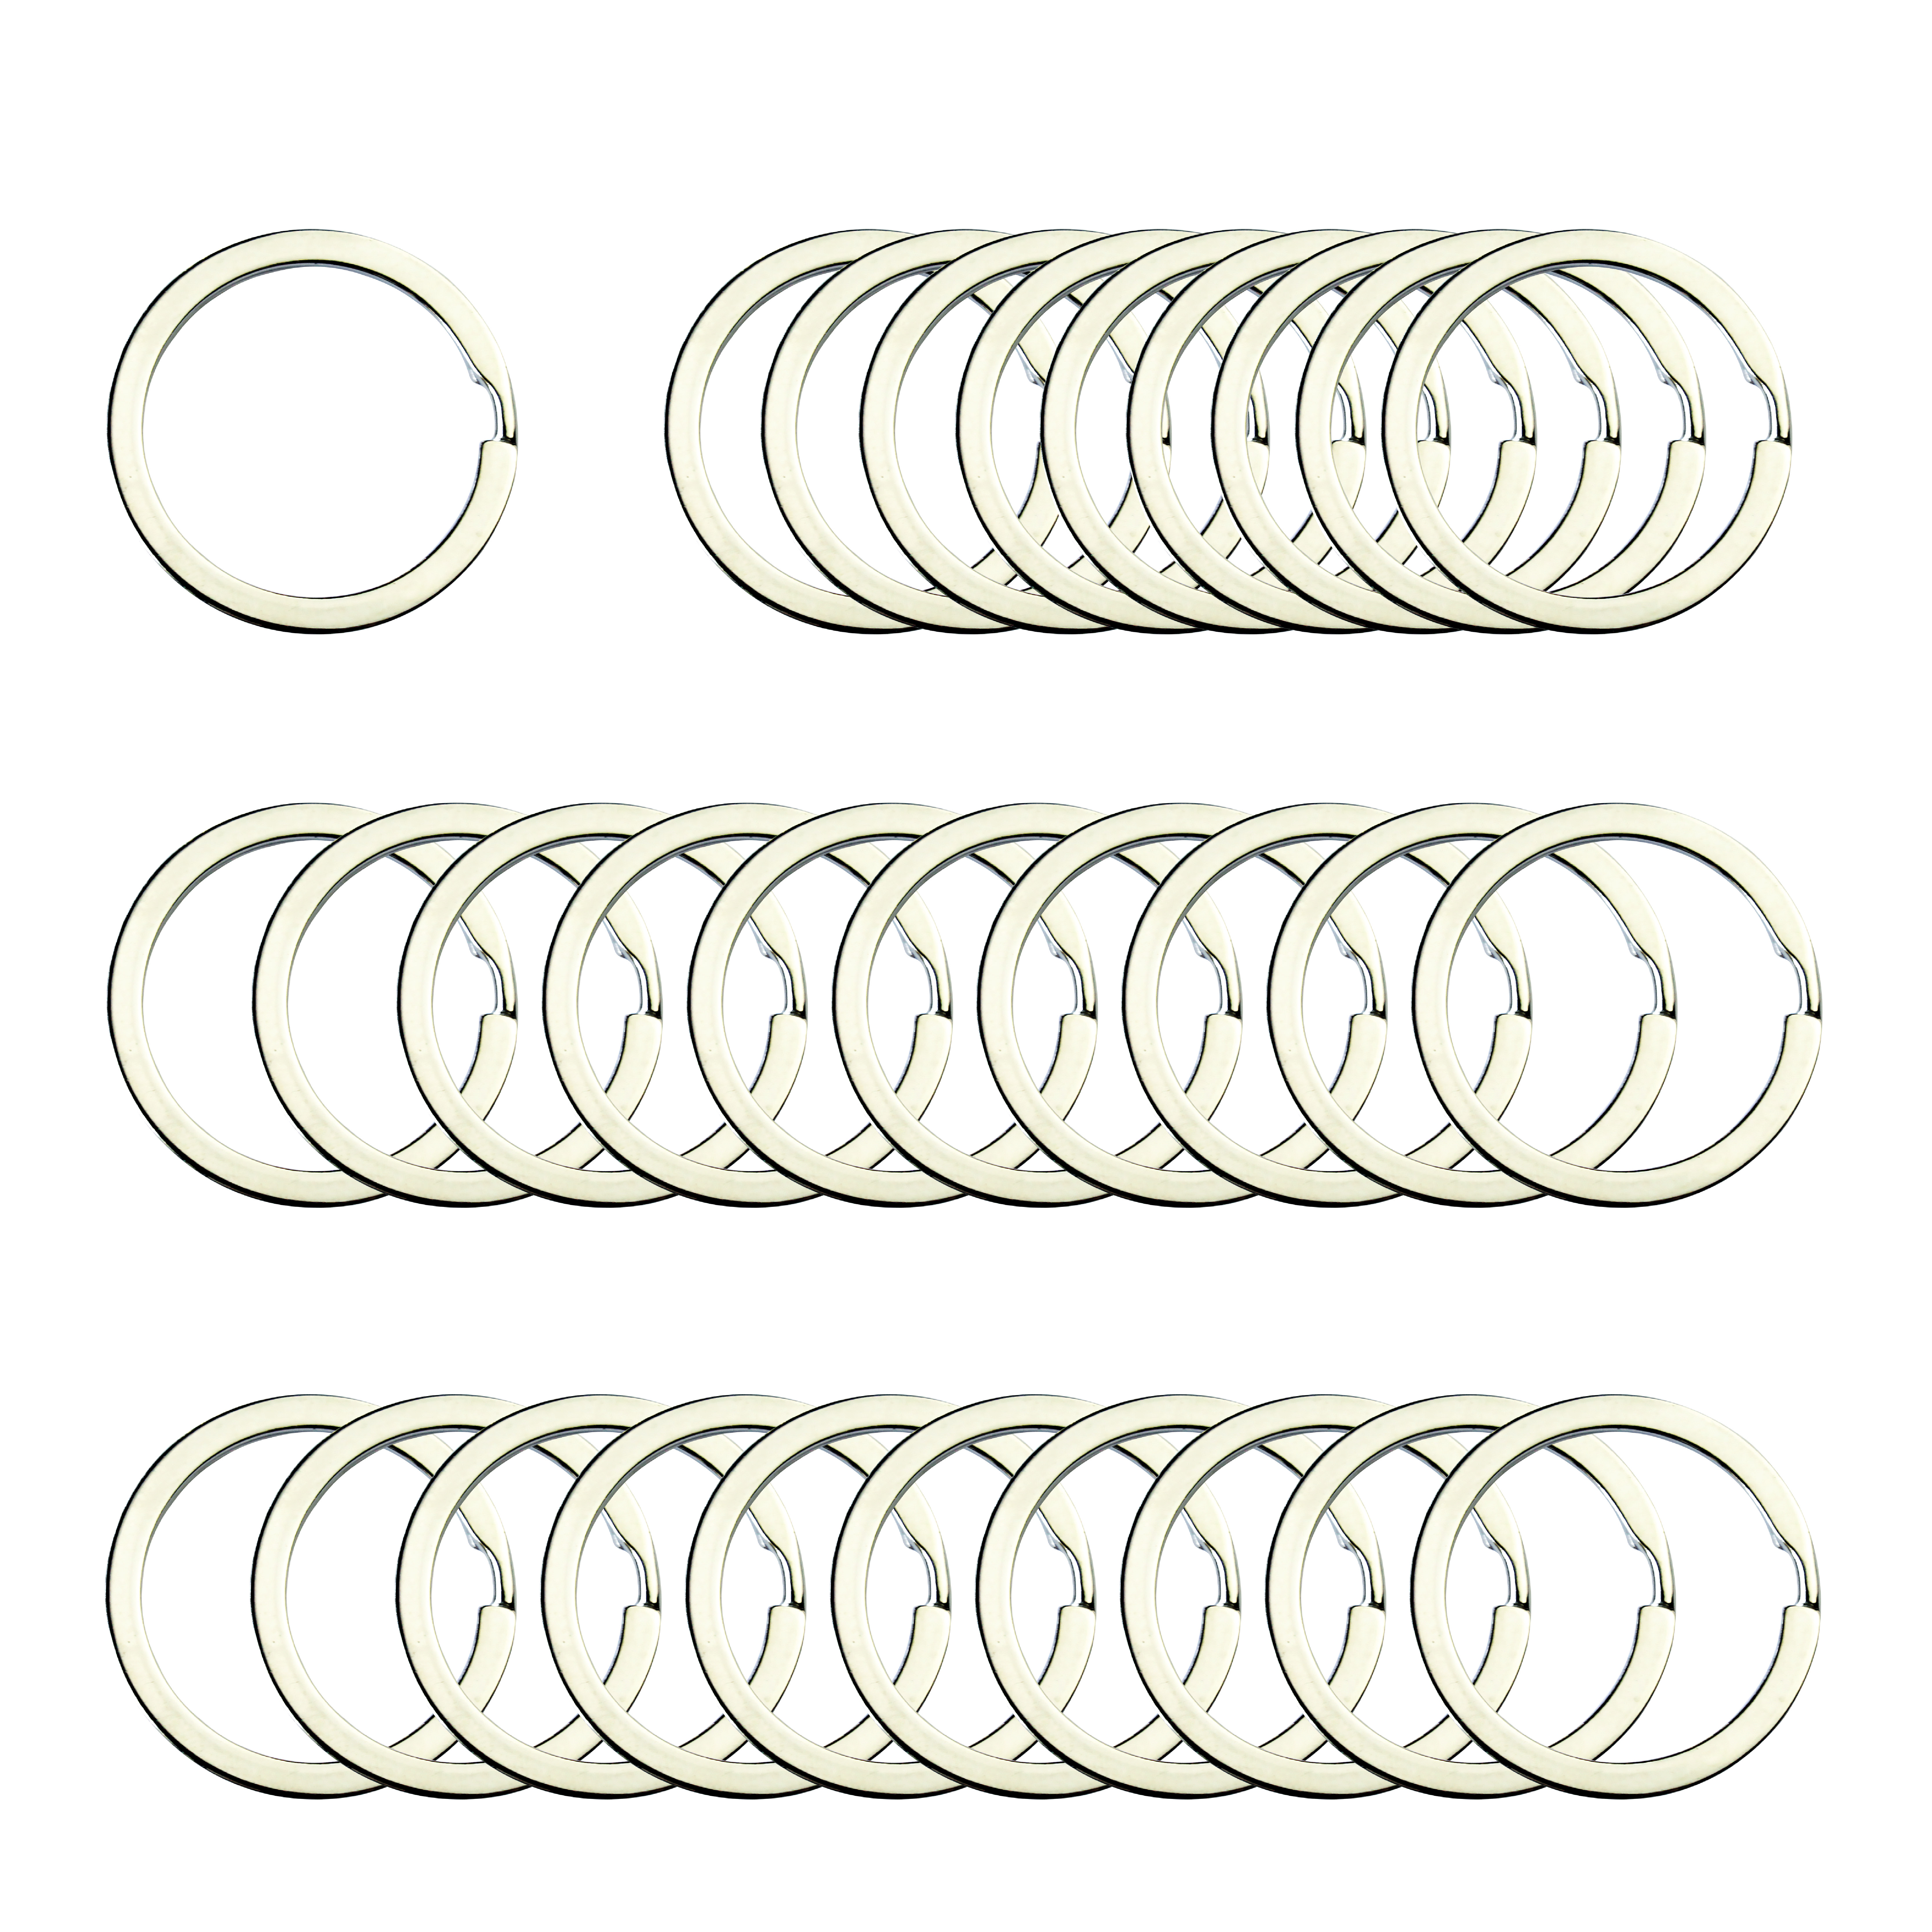 Metal Key Rings with Chains and Small Round Split Rings for Organizing Keys and Making Craft 20 Pieces